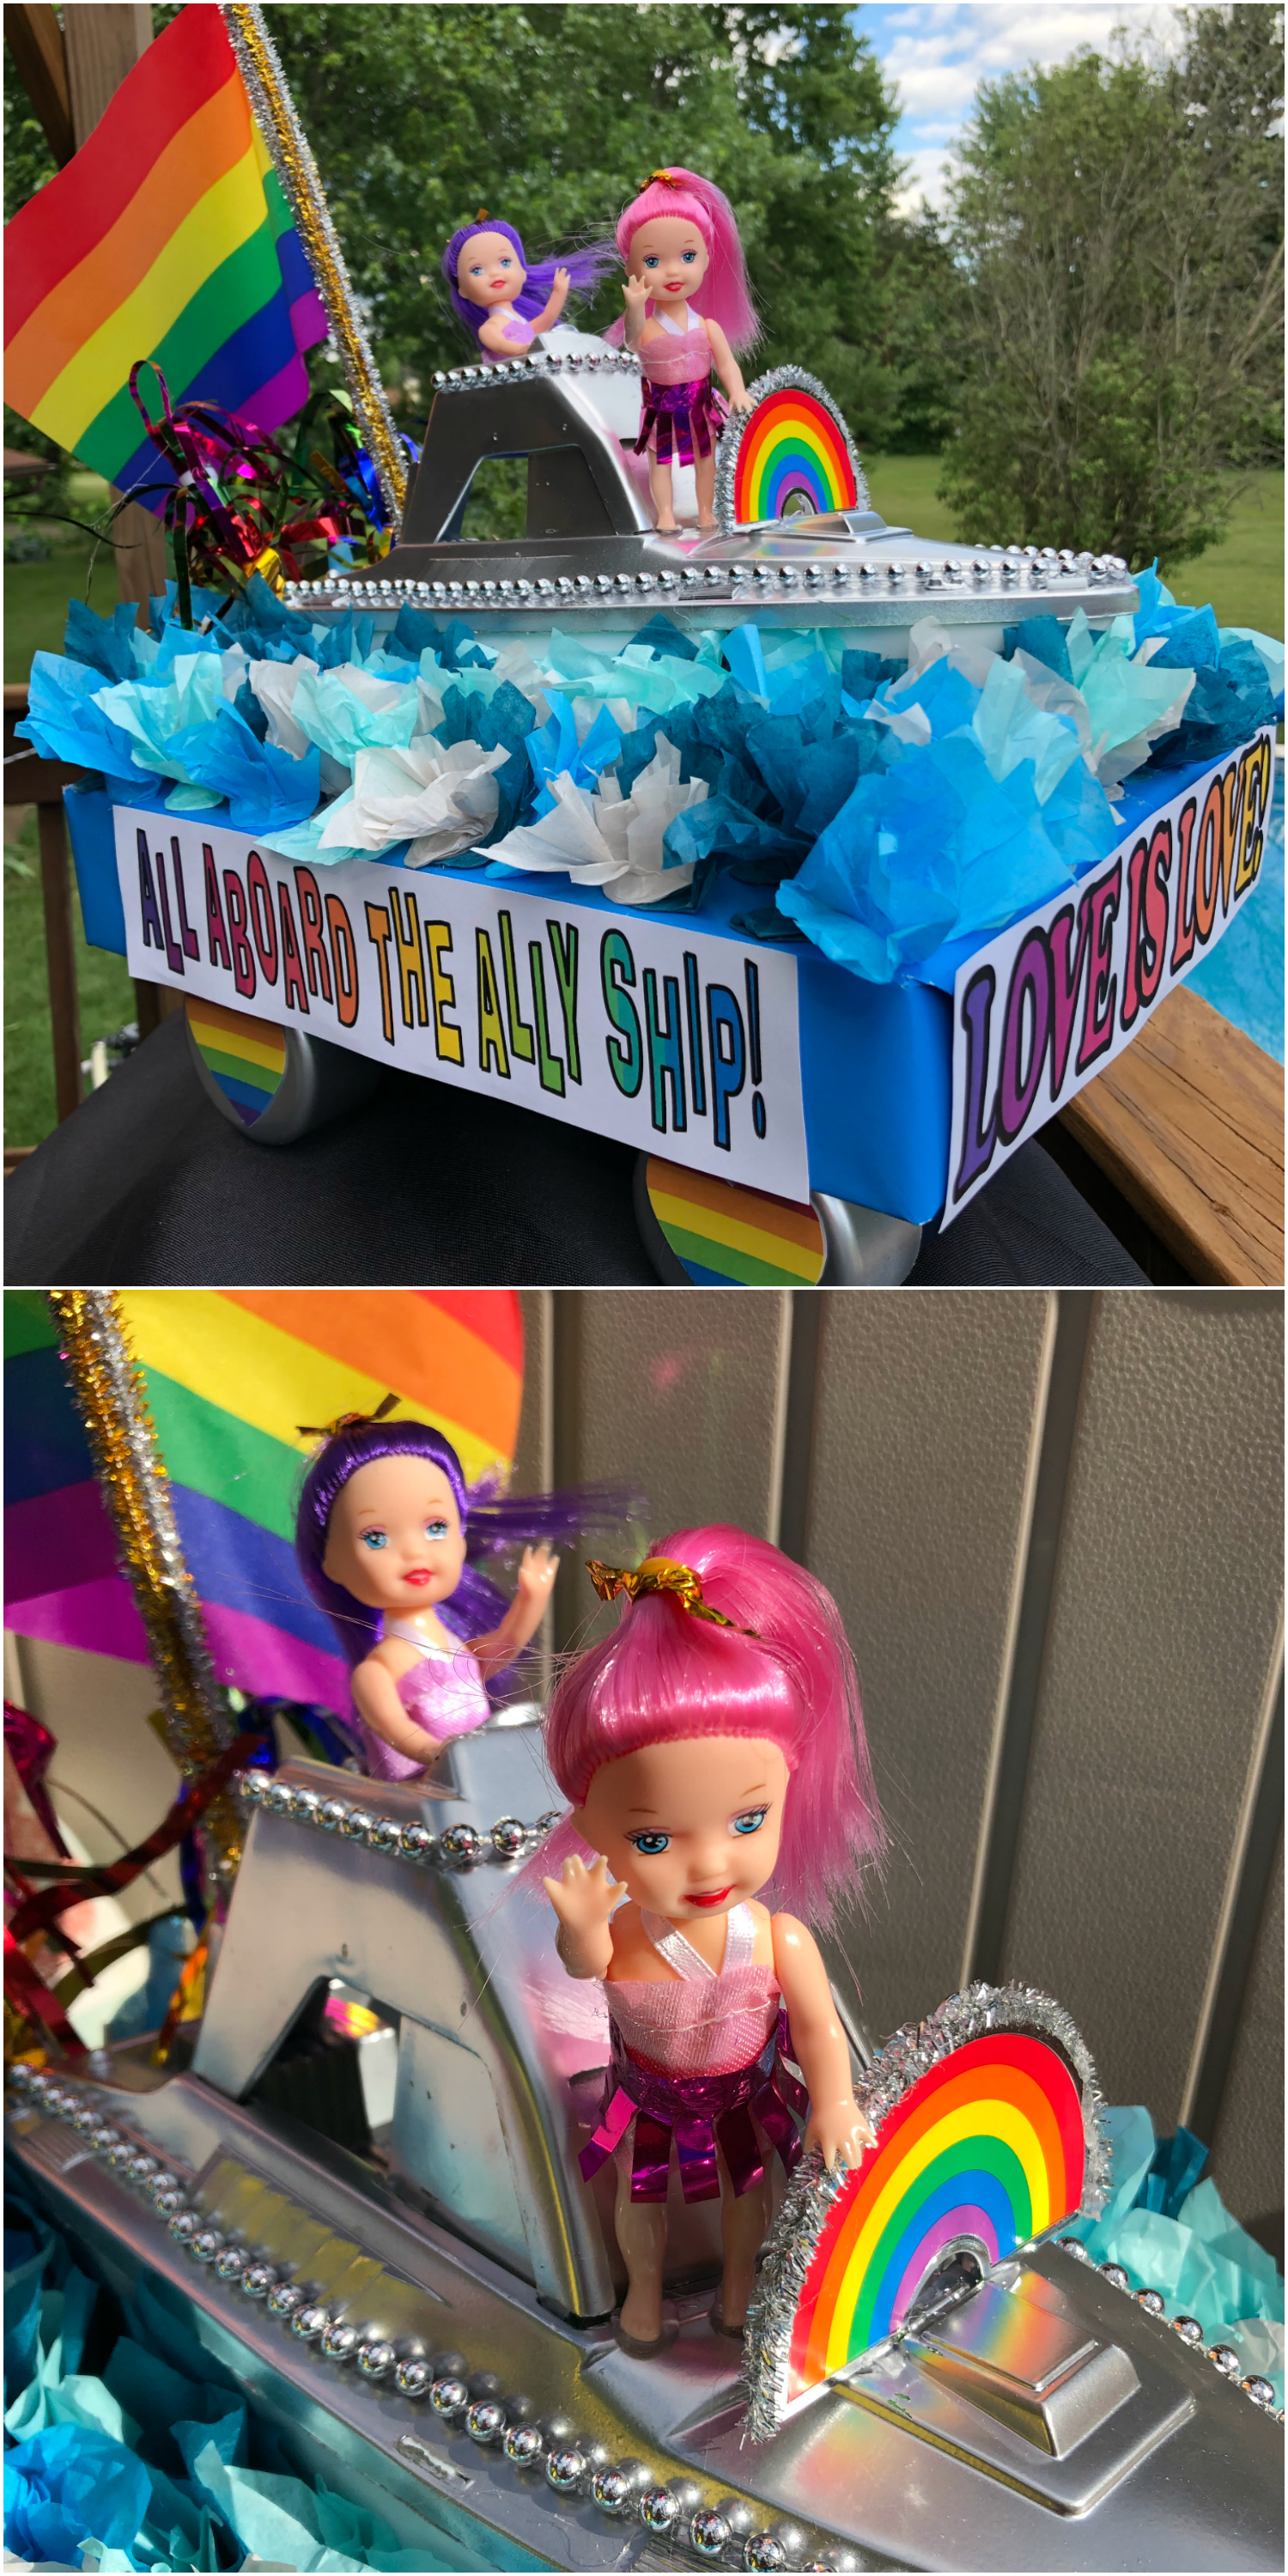 miniature boat themed pride float that says 